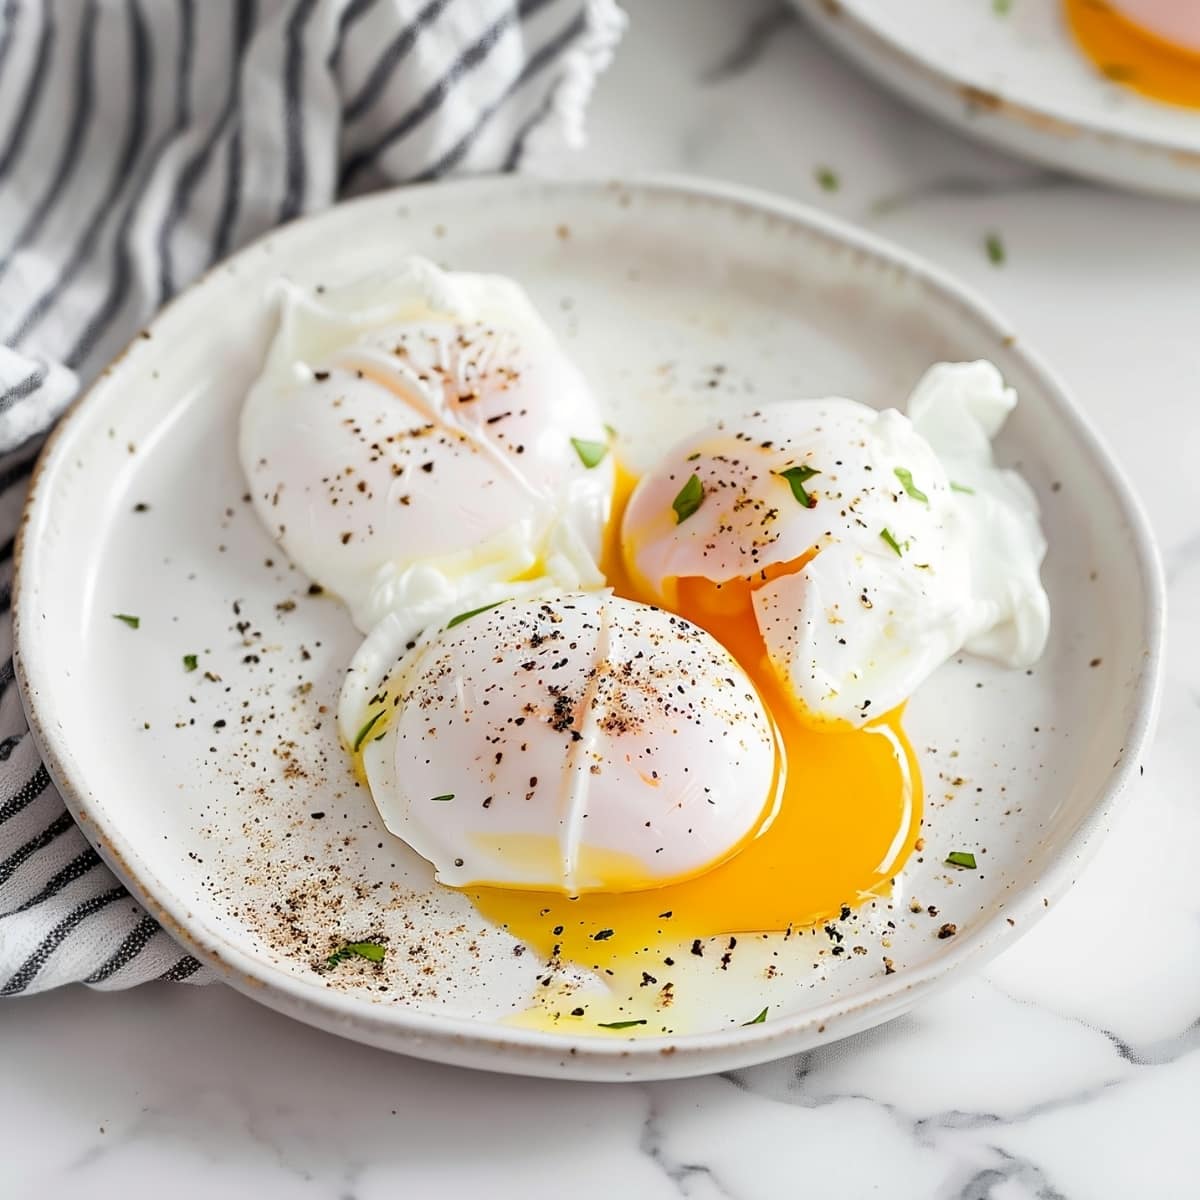 Poached eggs with seasonings and herbs in a white plate 